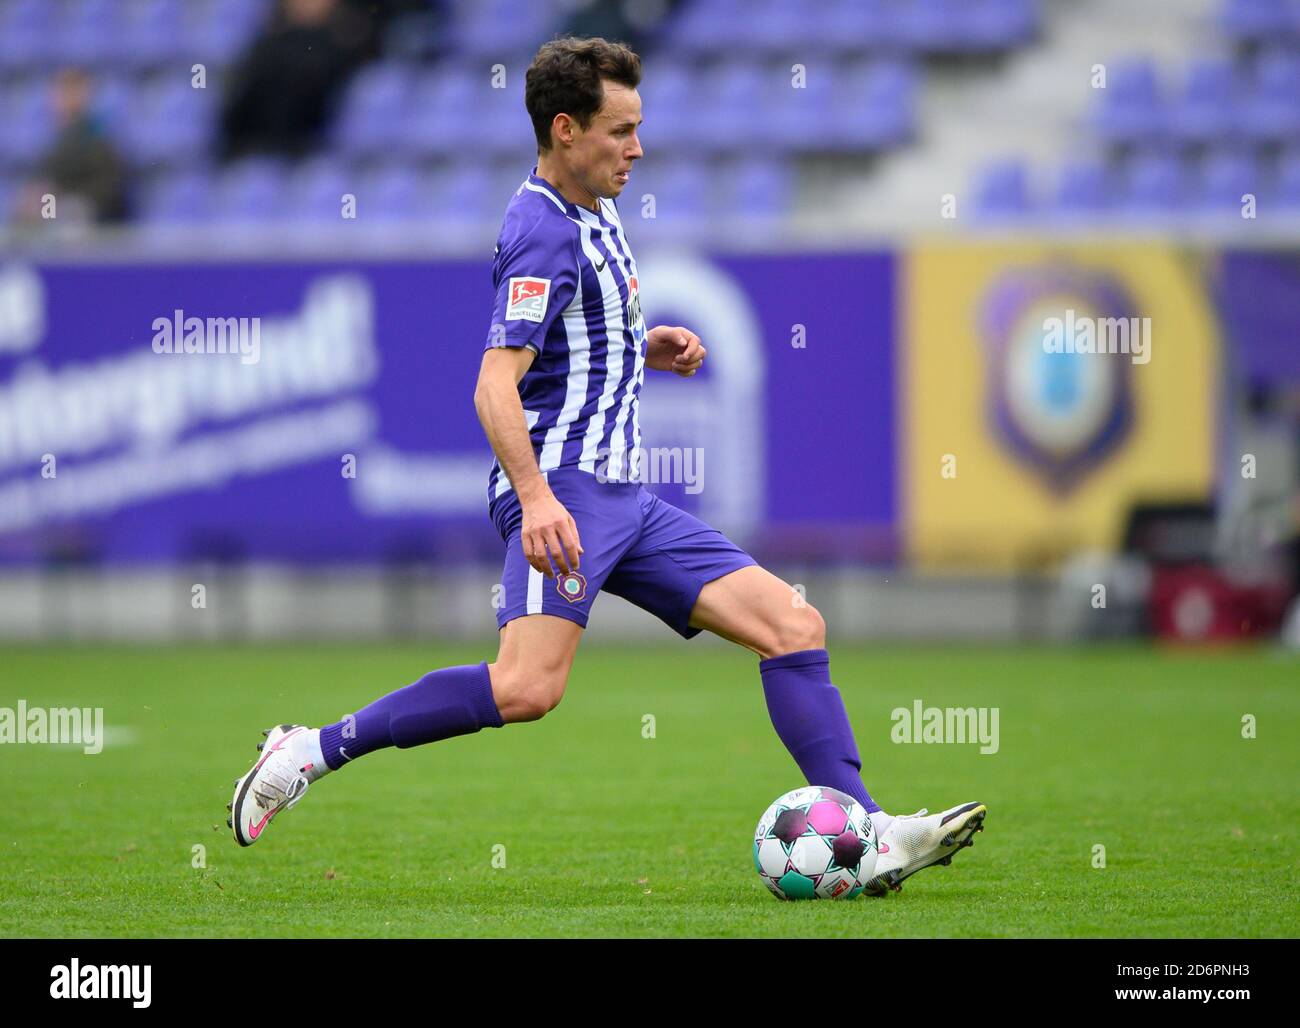 Aue, Germany. 18th Oct, 2020. Football: 2nd Bundesliga, FC Erzgebirge Aue - 1st FC Heidenheim, 4th matchday, at the Erzgebirgsstadion. Aues Clemens Fandrich plays the ball. Credit: Robert Michael/dpa-Zentralbild/dpa - IMPORTANT NOTE: In accordance with the regulations of the DFL Deutsche Fußball Liga and the DFB Deutscher Fußball-Bund, it is prohibited to exploit or have exploited in the stadium and/or from the game taken photographs in the form of sequence images and/or video-like photo series./dpa/Alamy Live News Stock Photo